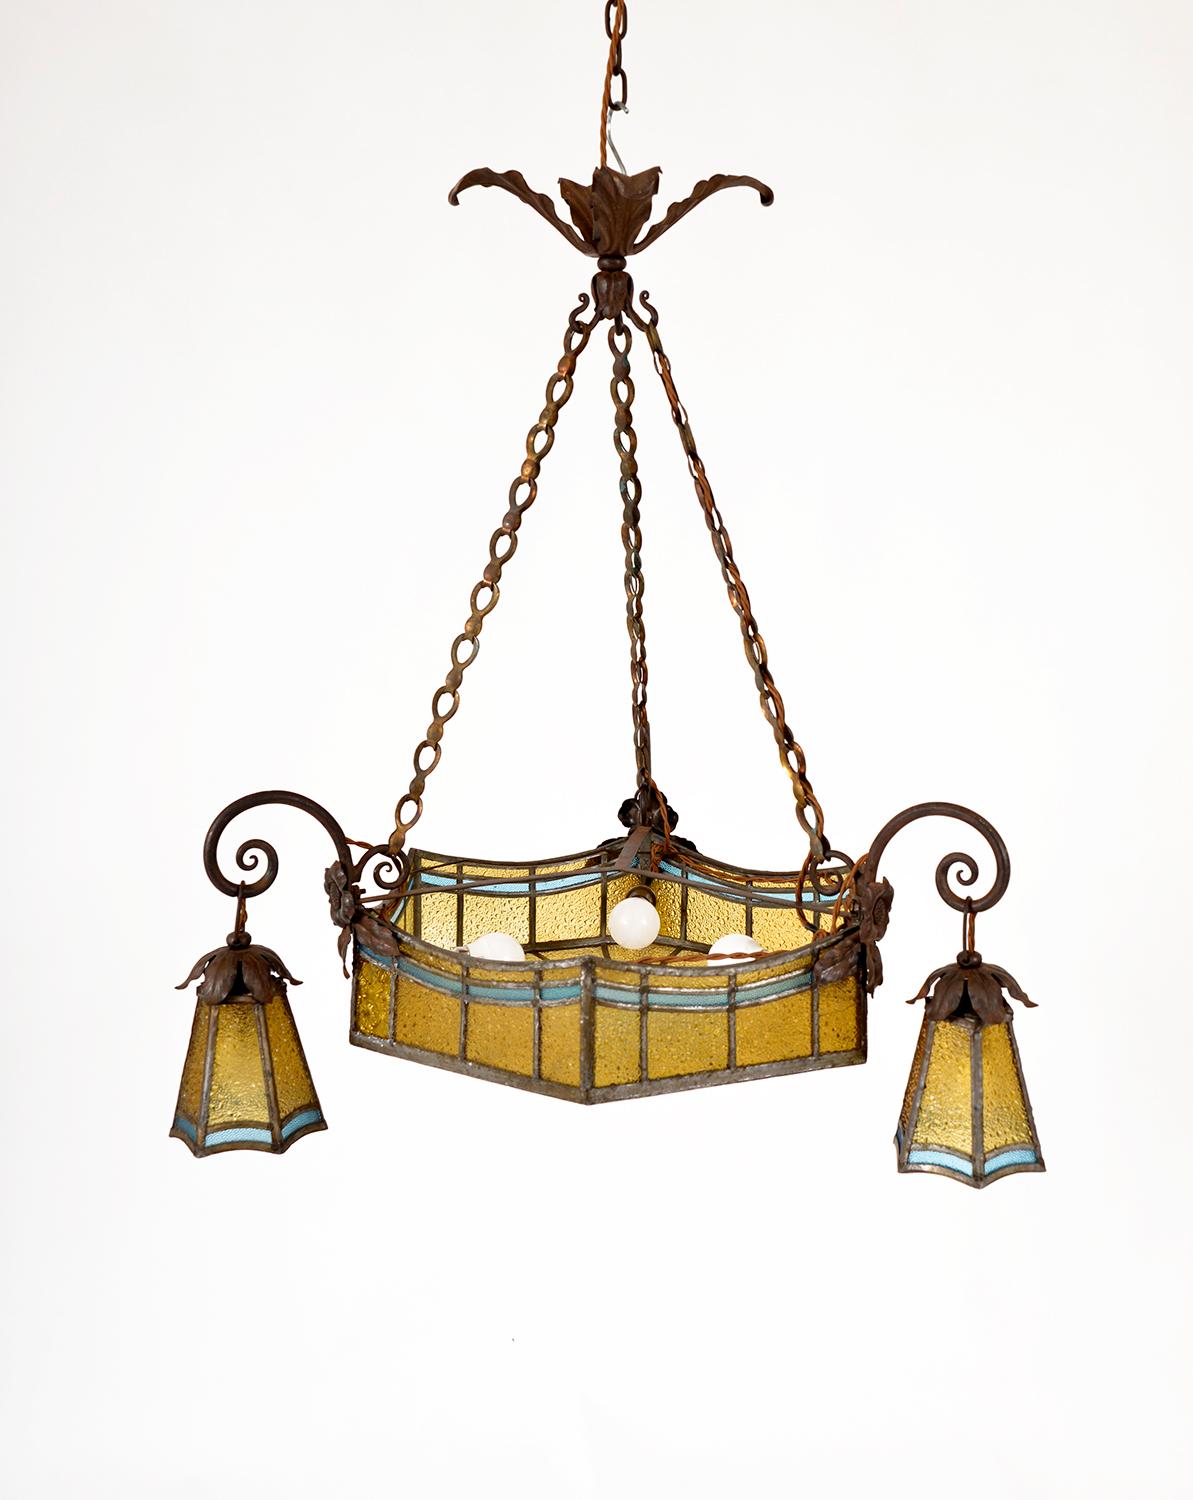 Forged Antique French Arts & Crafts Leaded Stained Glass Hall Pendant Light Chandelier